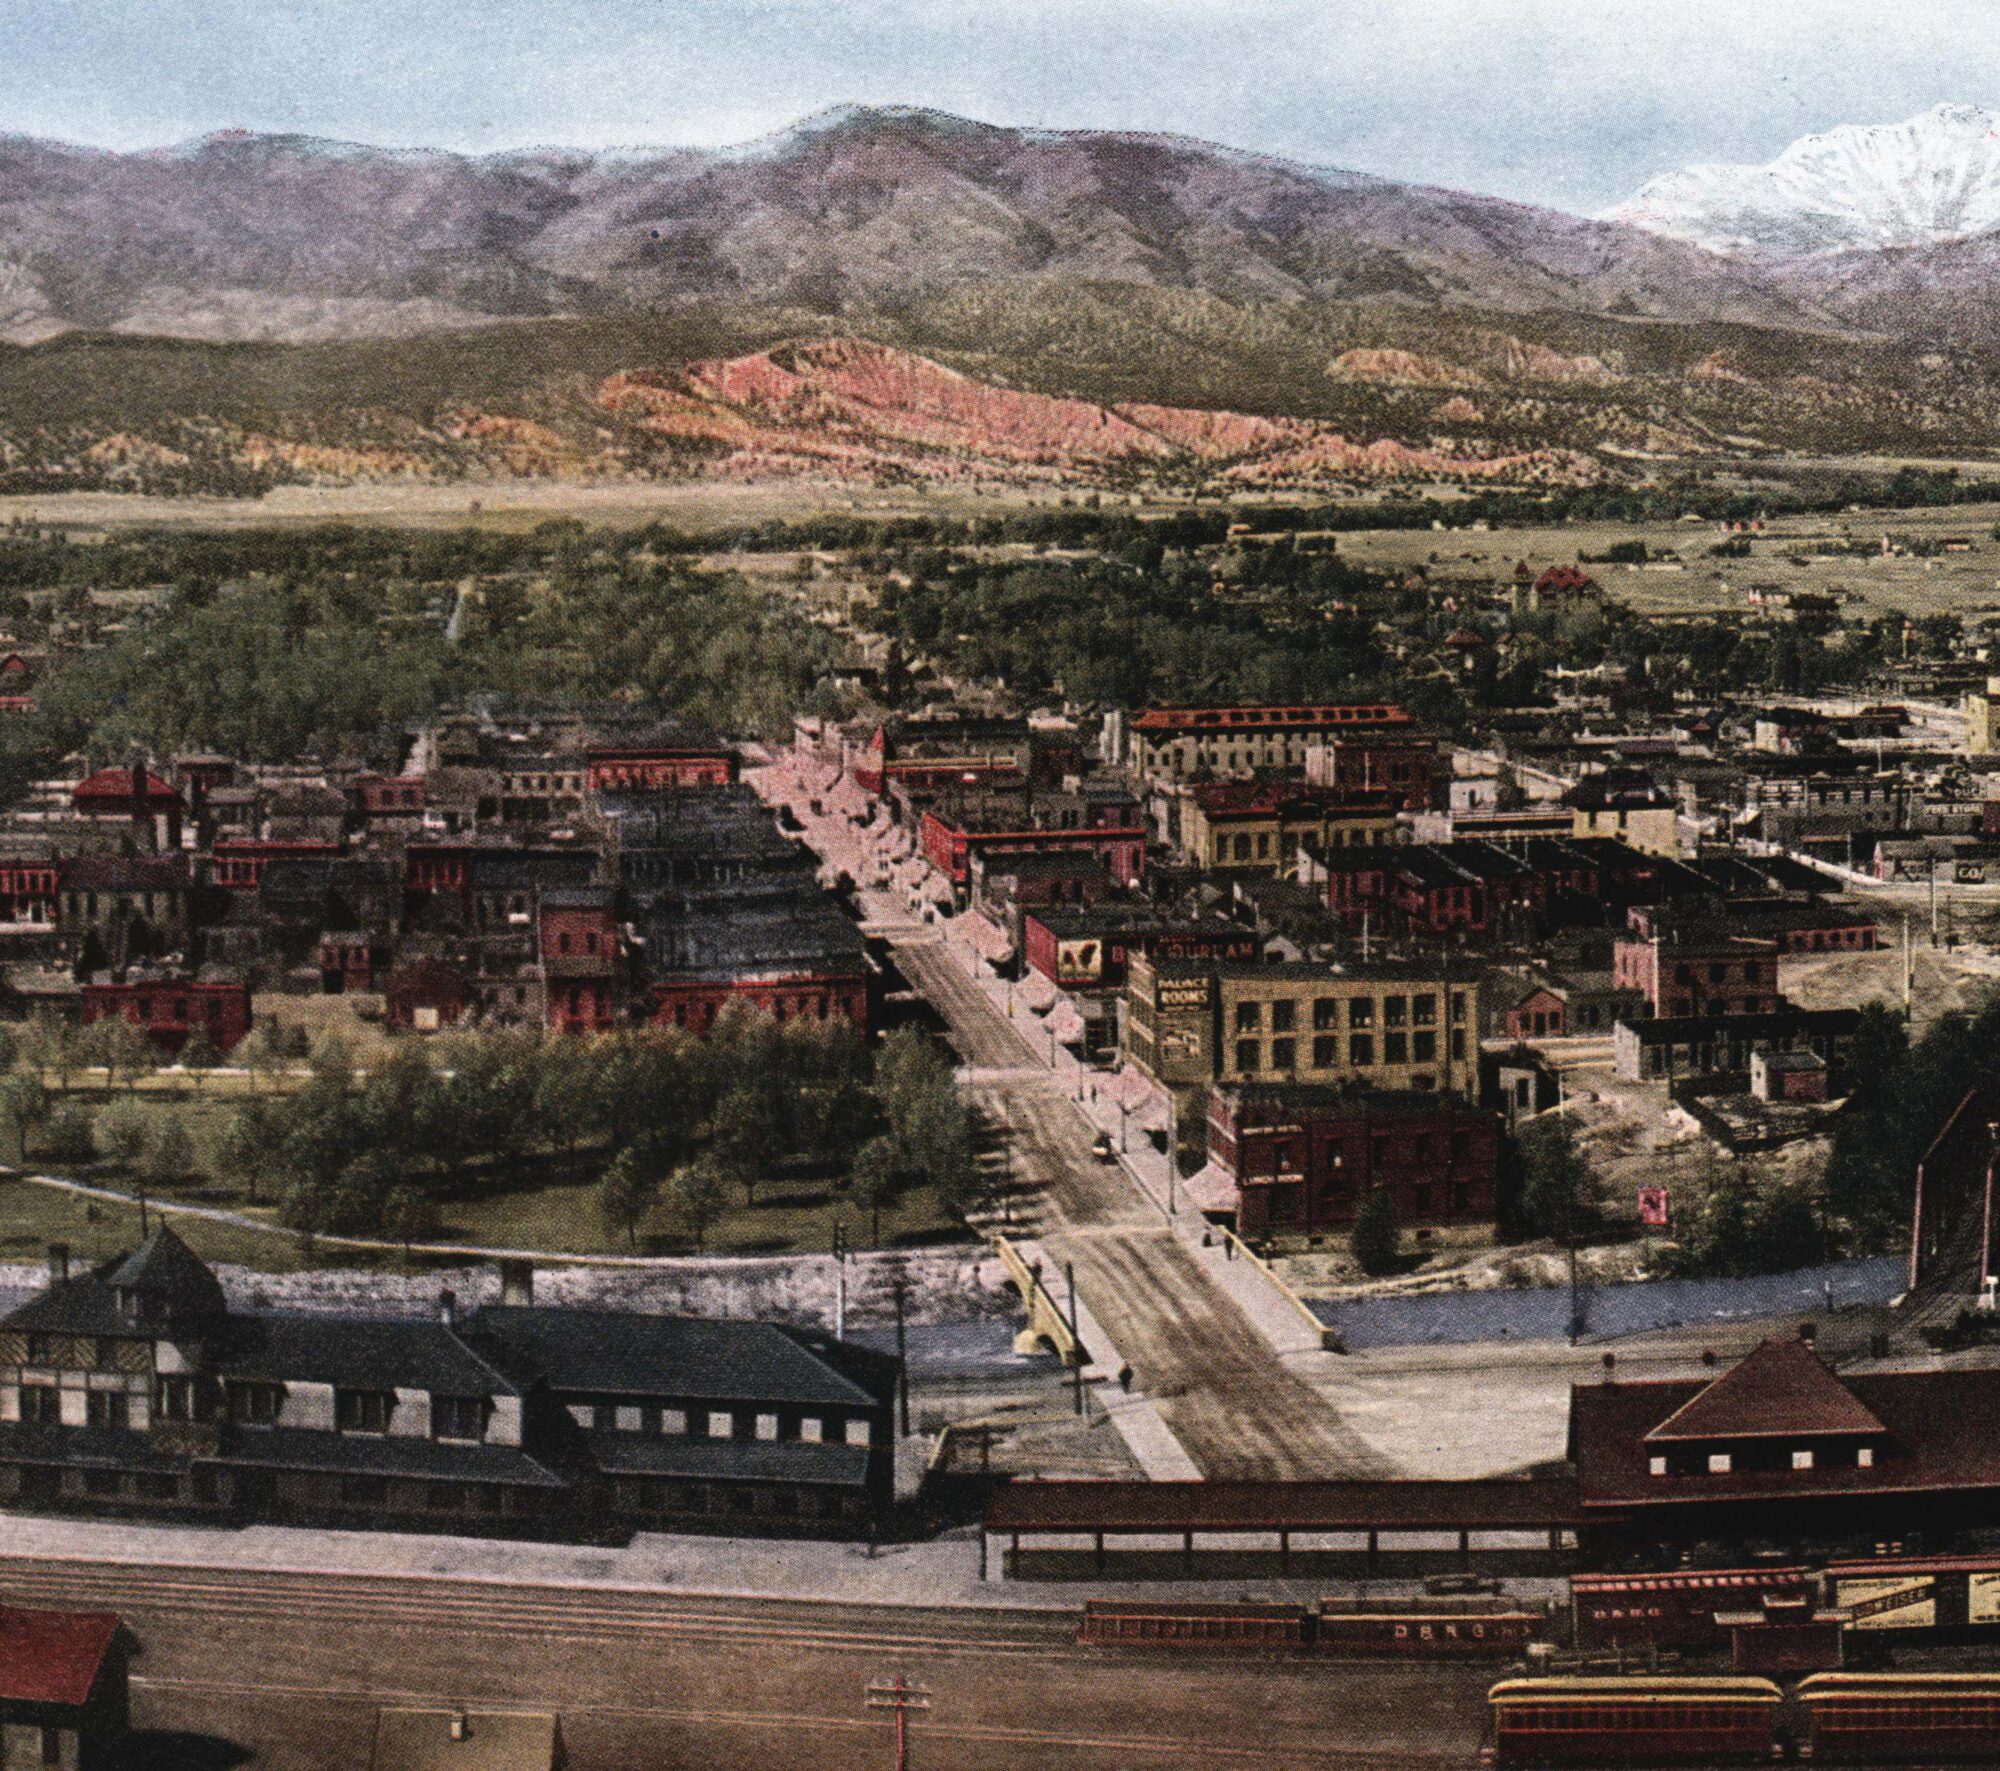 Bird's Eye View Of Salida 1917 From Rocky Mountain Views On Thr Rio Grande The Scenic Line Of The World Thumbnail.jjacksoncoll